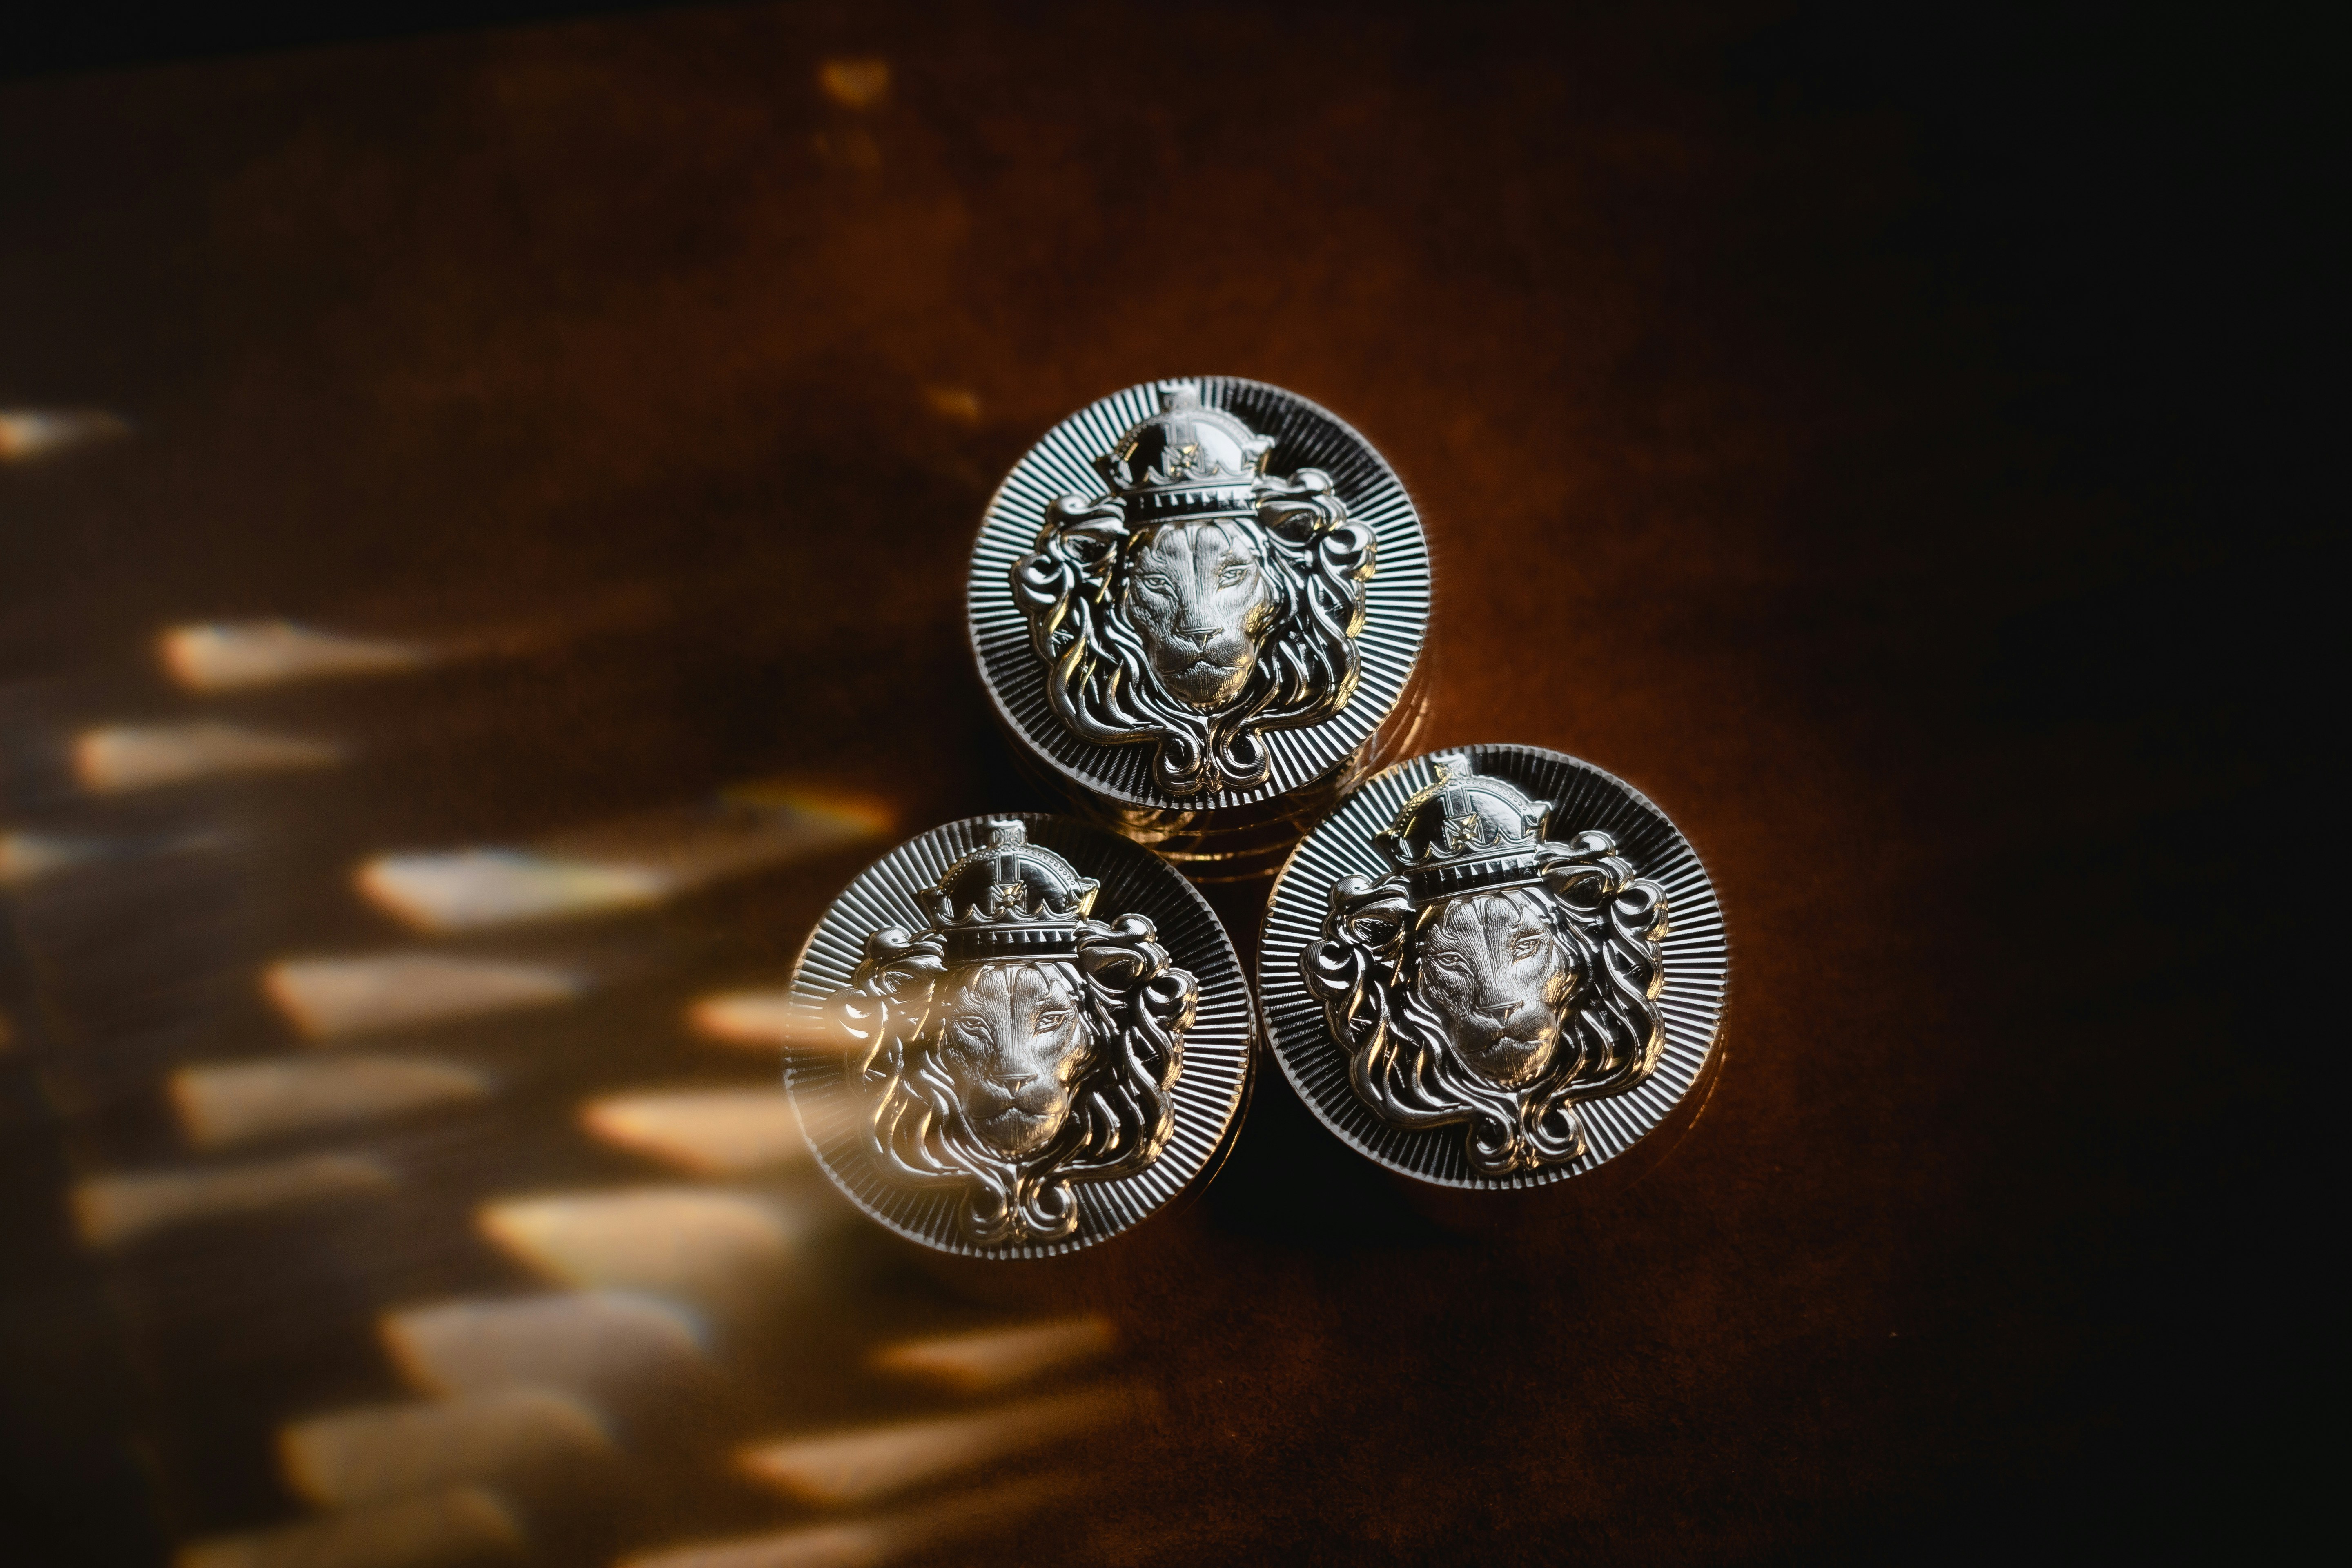 2 oz Scottsdale Silver Stackers from Scottsdale Mint sitting on a dark background. 🇺🇸 Minting Gold/Silver in AZ, Legal Tender for 20+ Countries Creator of Silver Stacker® Bars . We are a US private mint based in Scottsdale Arizona. We design, manufacture and deliver the best silver and gold coins and bars on the market for both consumers, banks and governments around the world.